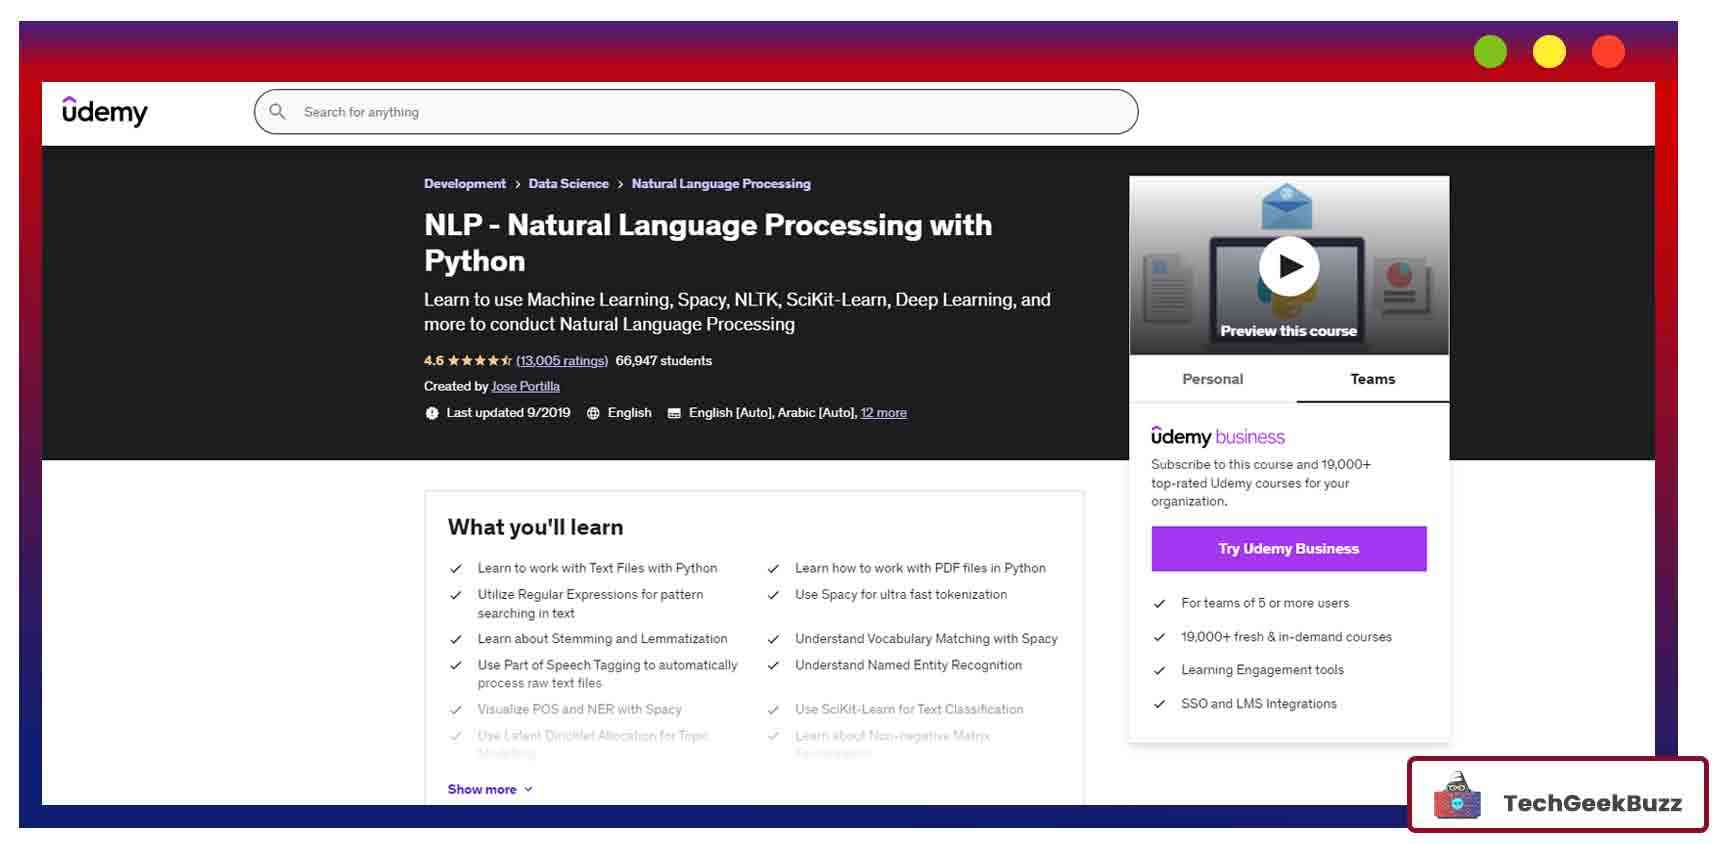 NLP - Natural Language Processing with Python